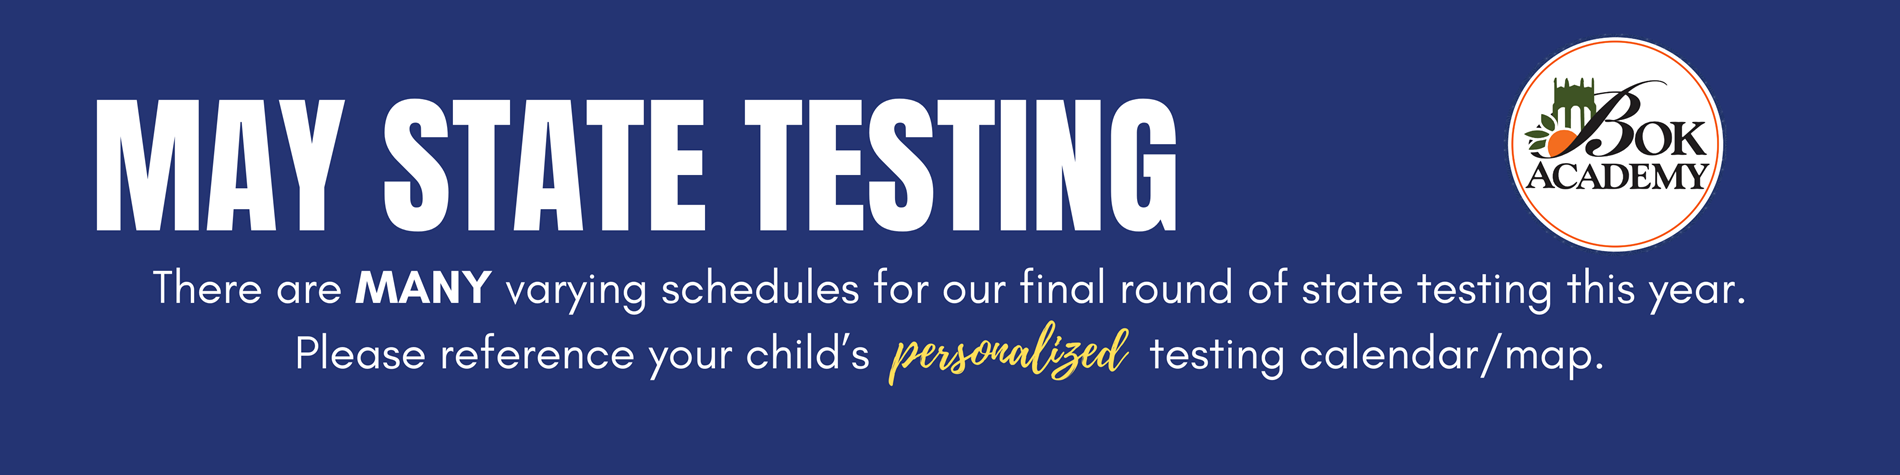 Please refer to your child's personalized testing calendar for testing dates.